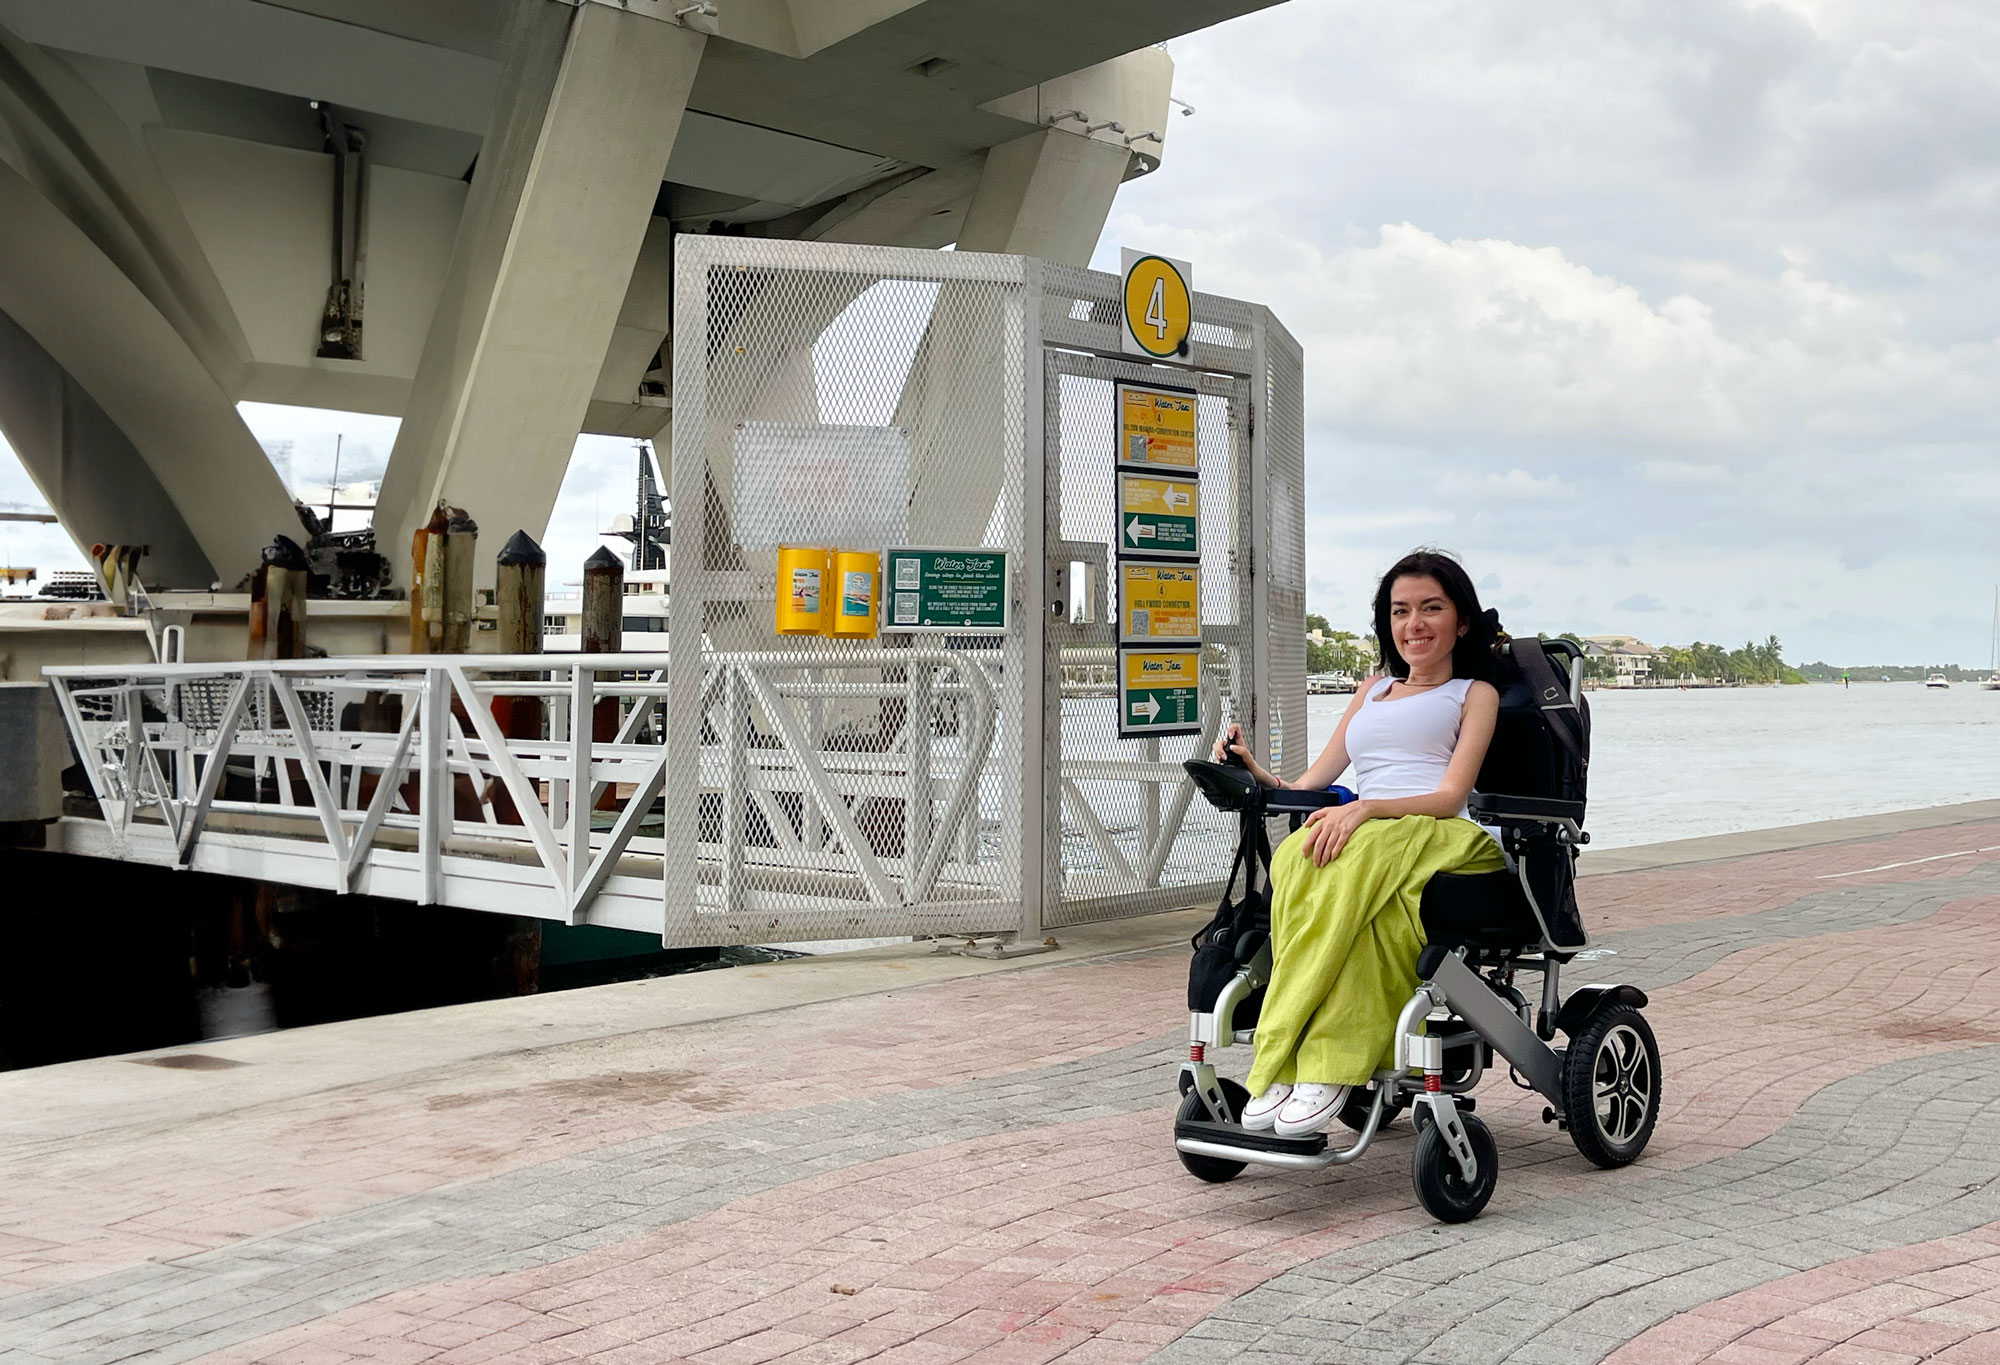 maayan in her wheelchair at stop 4 water taxi bridge by the ocean